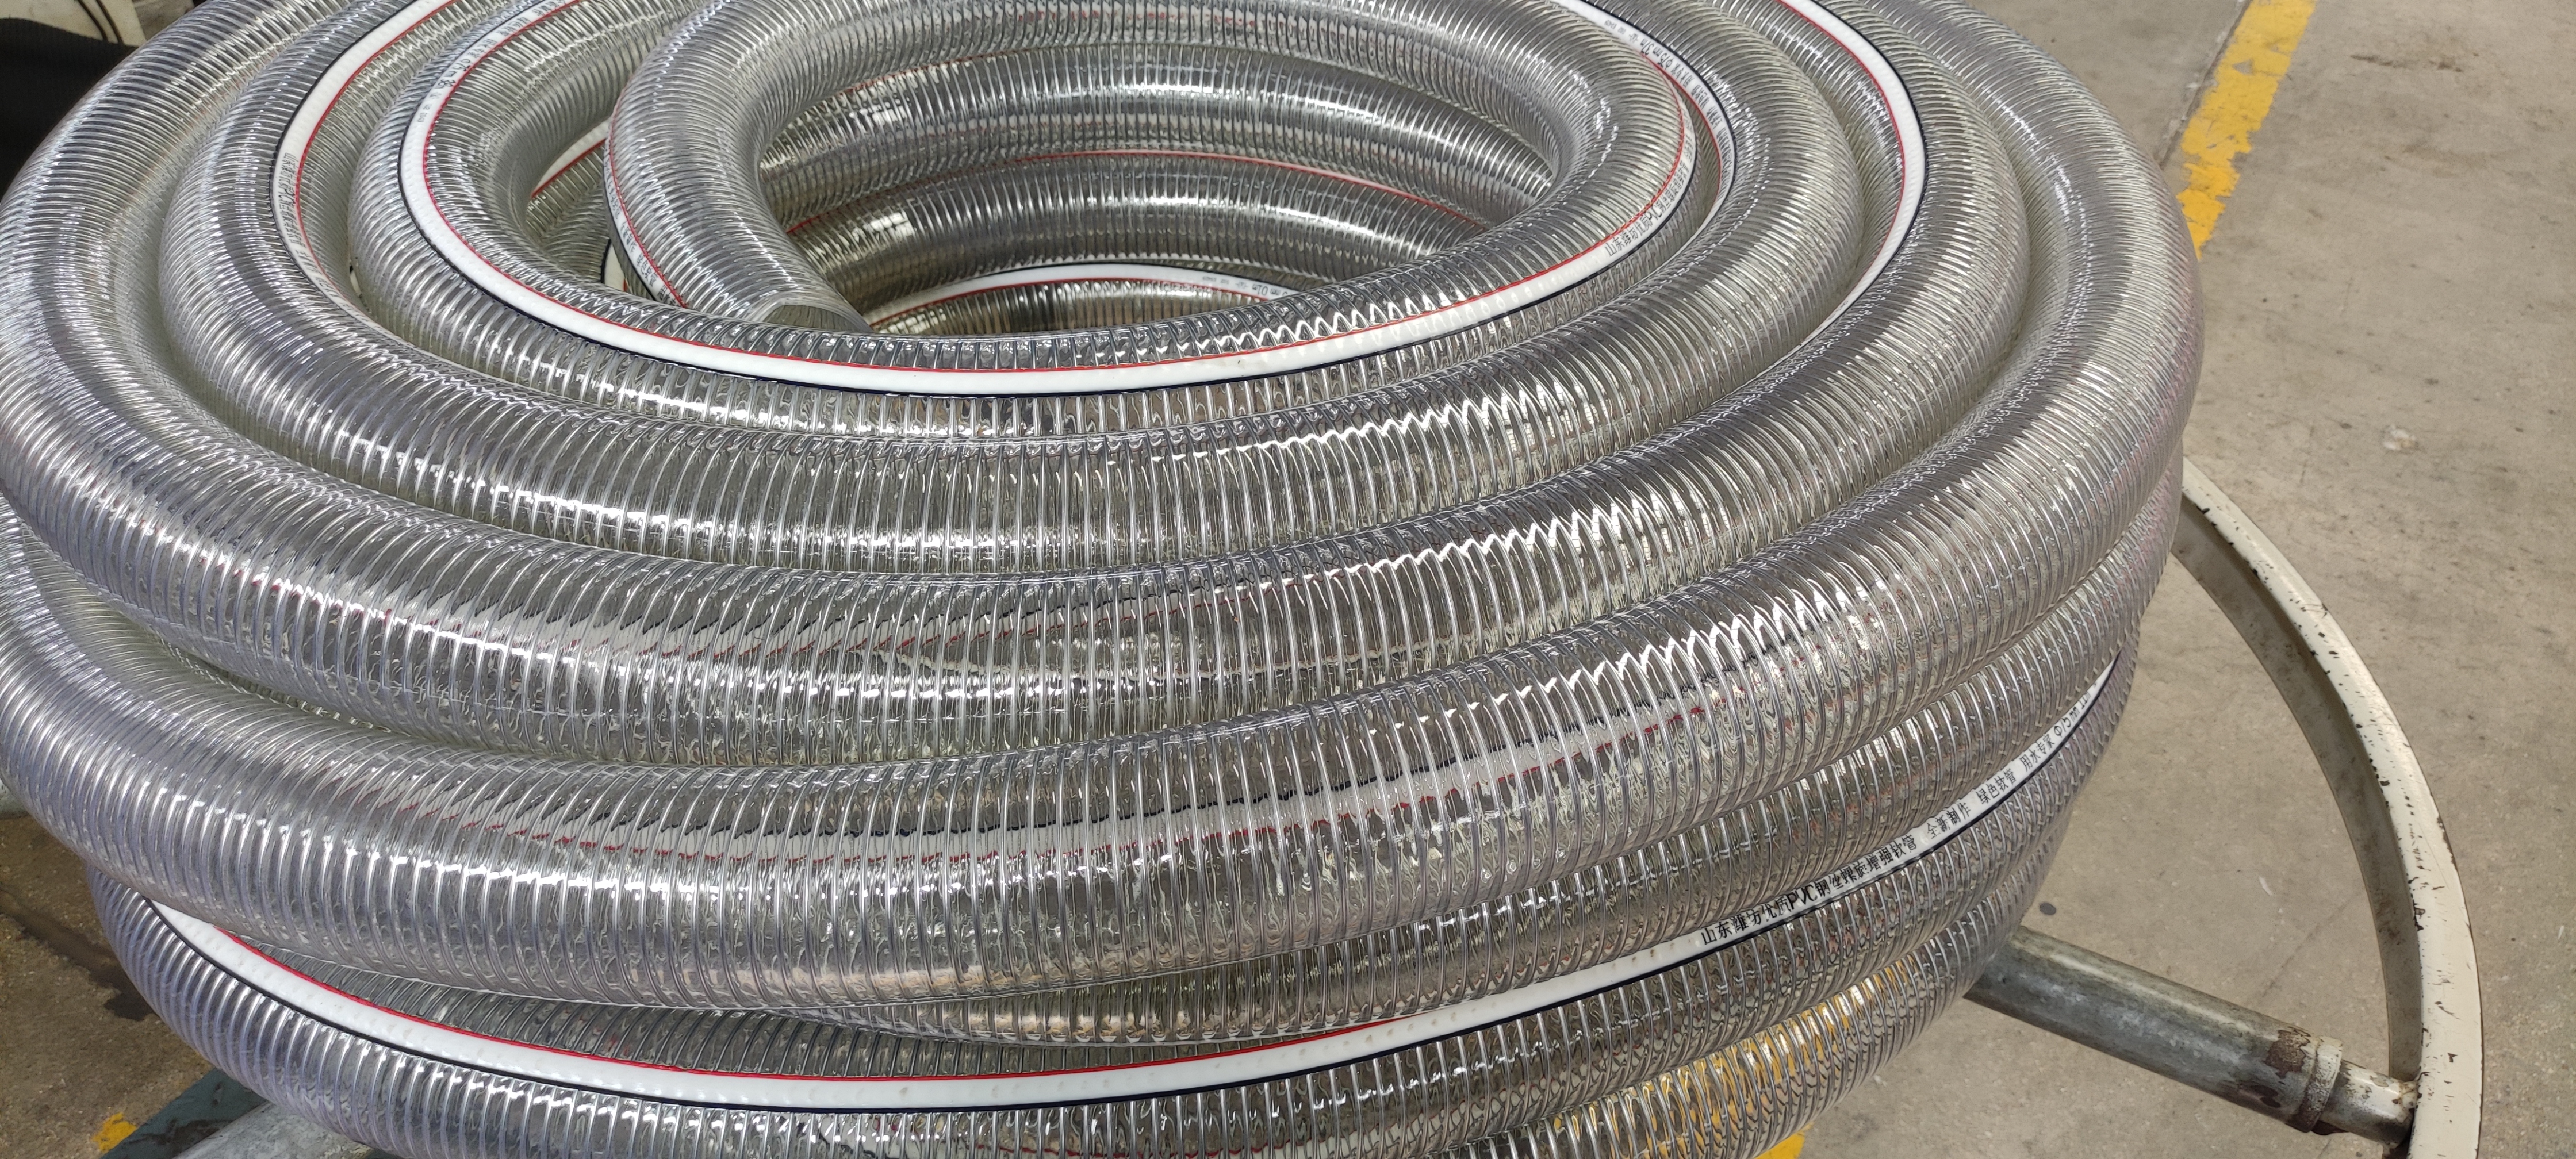 How to distinguish the concept of non-toxicity and environmental protection of PVC plastic hose